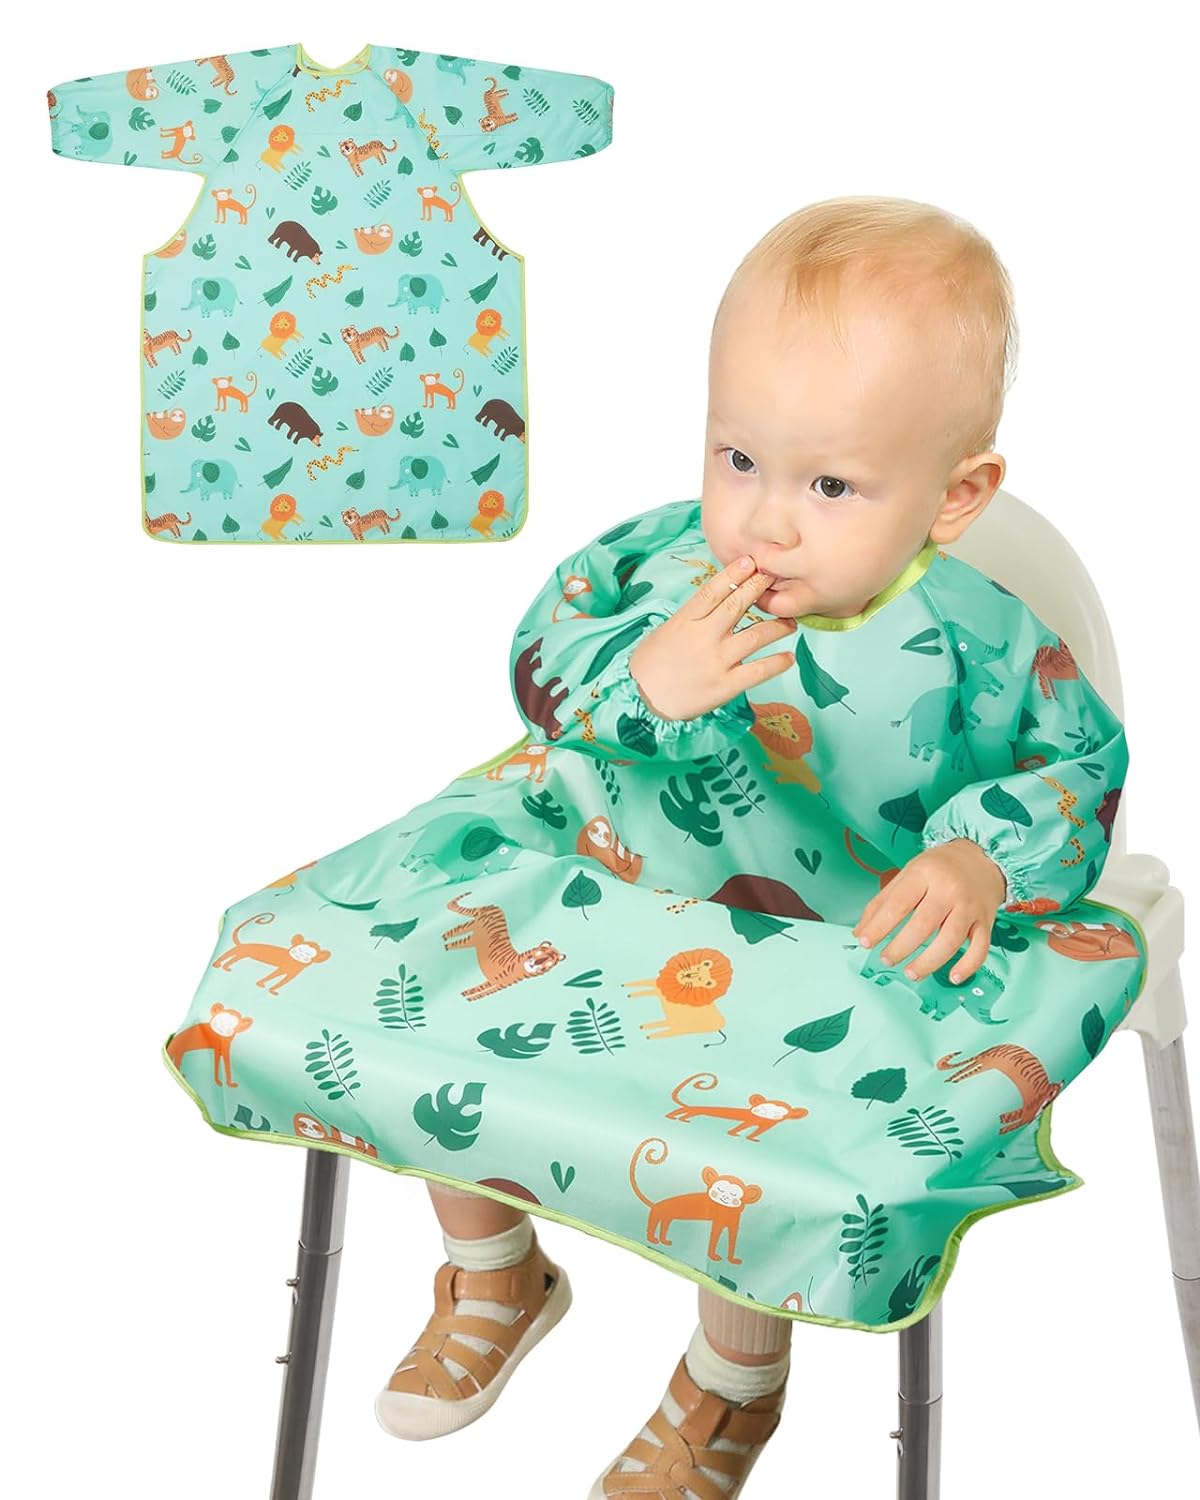 Lictin Coverall Baby Feeding Bibs - 2-Pack Long Sleeve Baby Bibs for Eating, Adjustable Weaning Bibs, Waterproof Bib Attaches and Fully Cover to Baby Highchair and Table